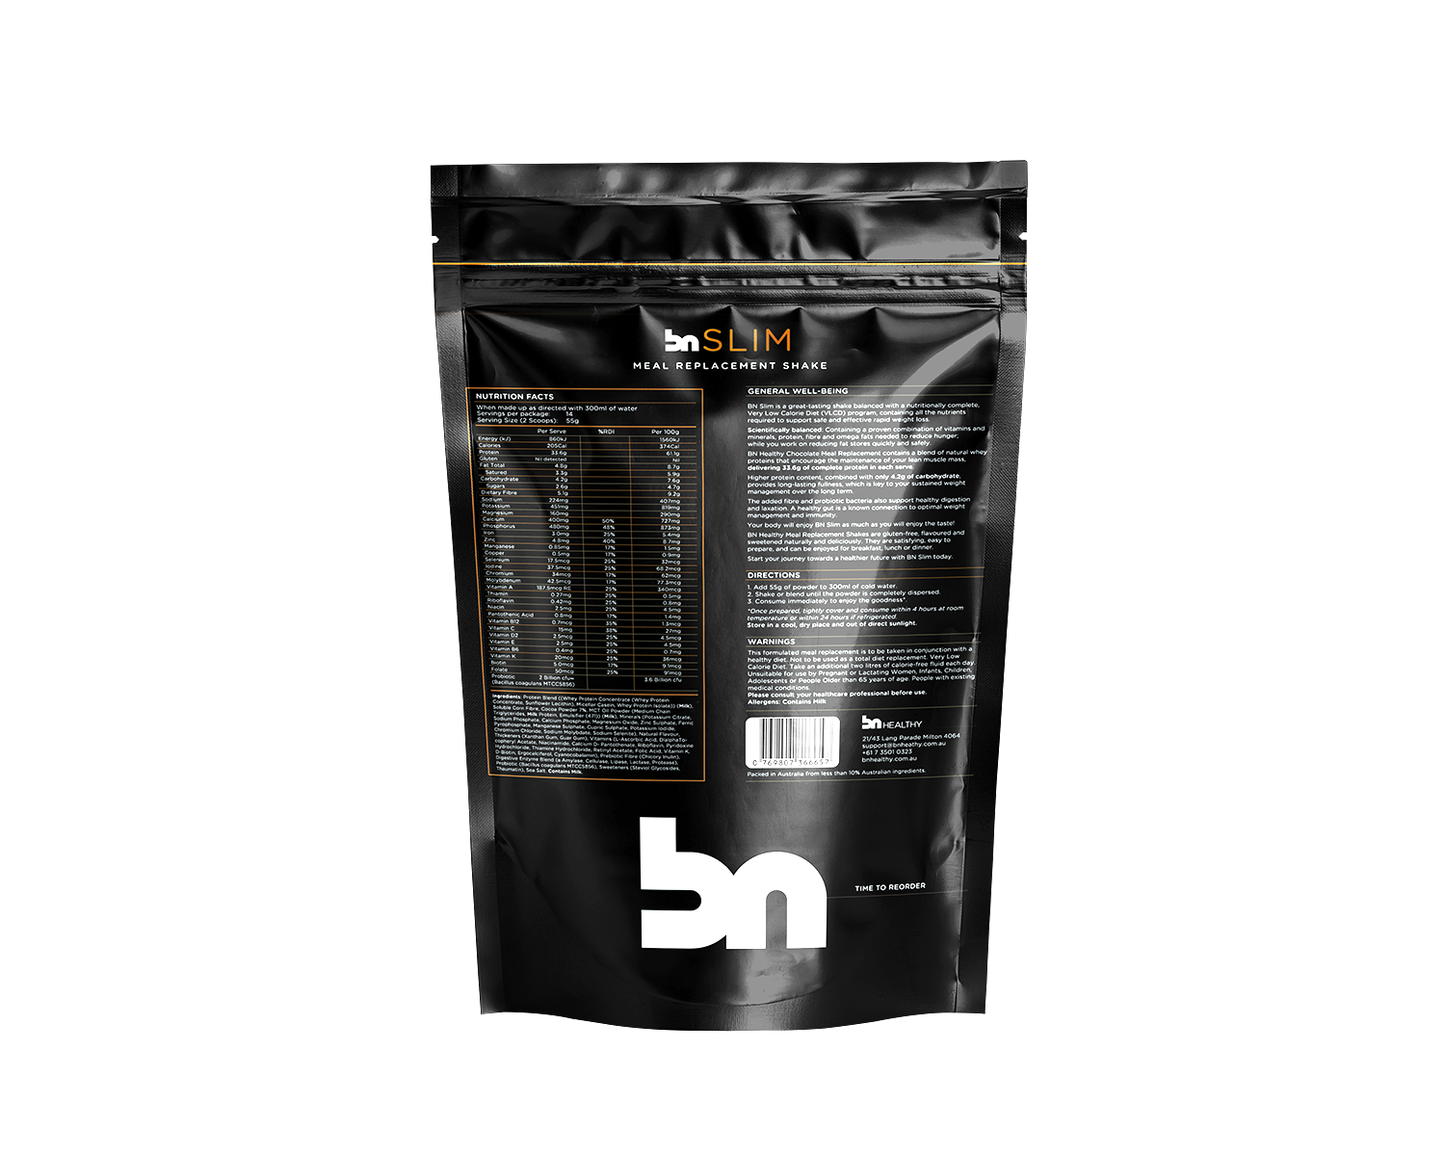 BN Slim - Meal Replacement Shake chocolate flavour nutritional information 